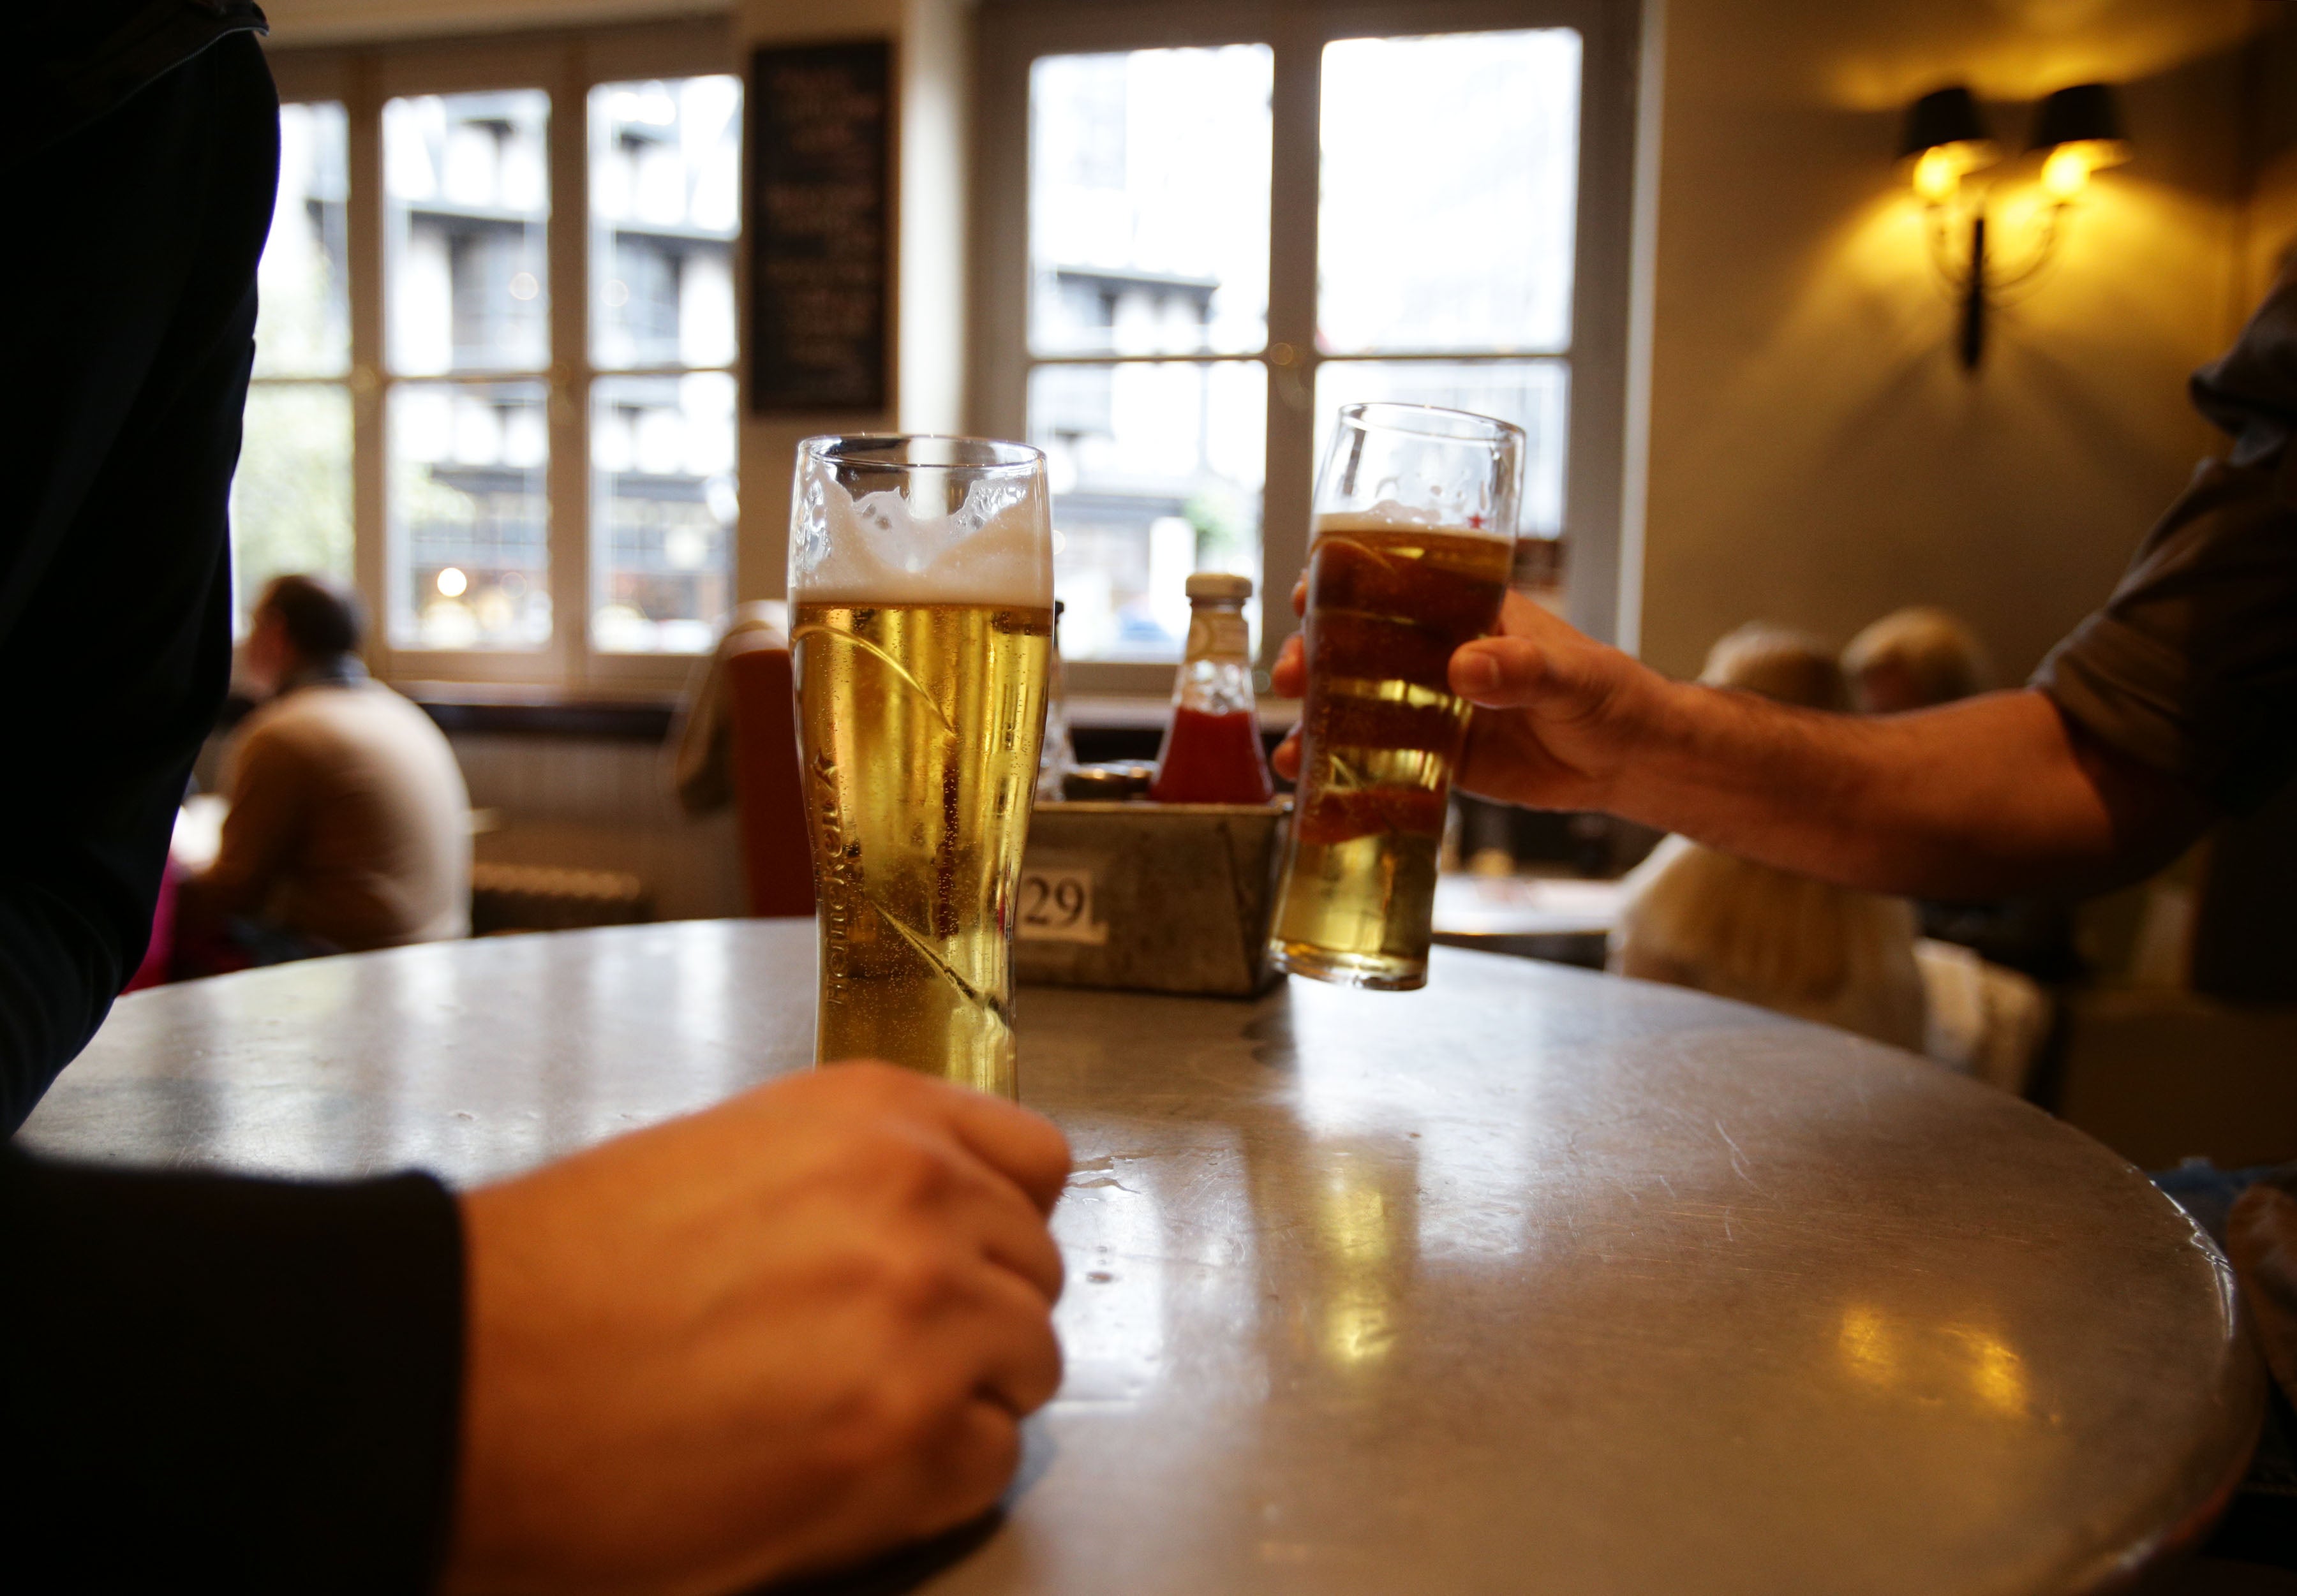 The festive season is a busy time behind the bar but some venues have seen a drop in bookings